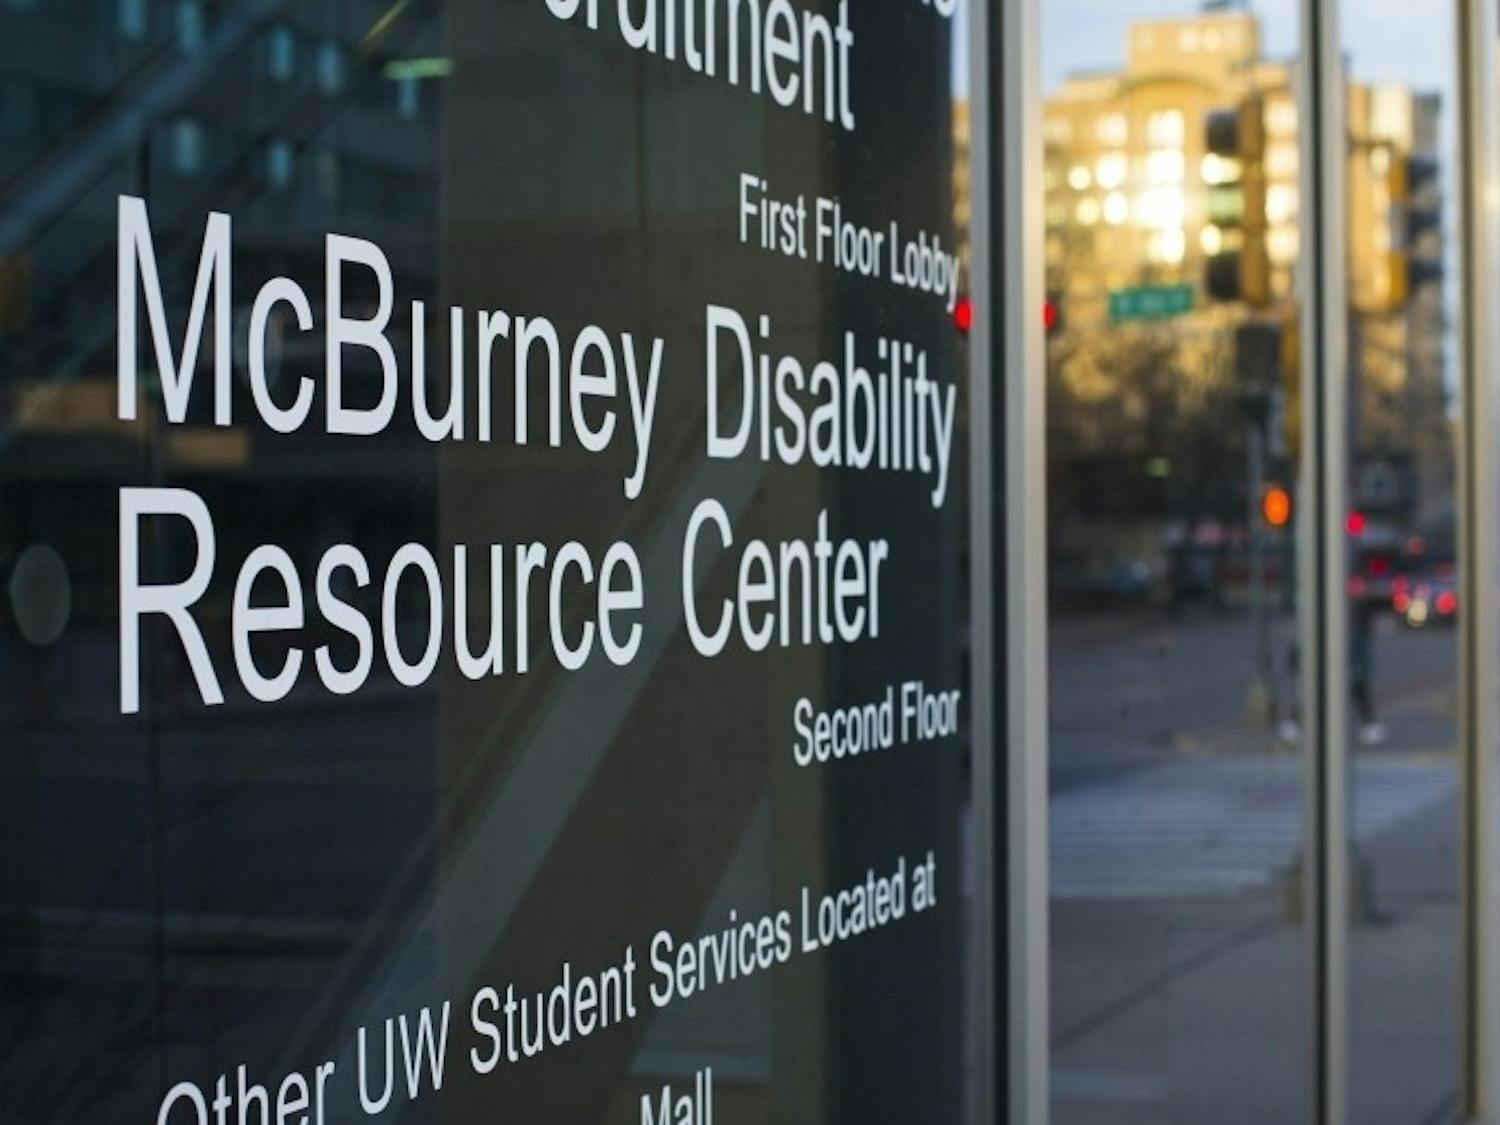 For students with special learning needs, a new online portal has replaced &mdash; and, coordinators say, hopefully streamlined &mdash; the in-paper accommodations McBurney request process.